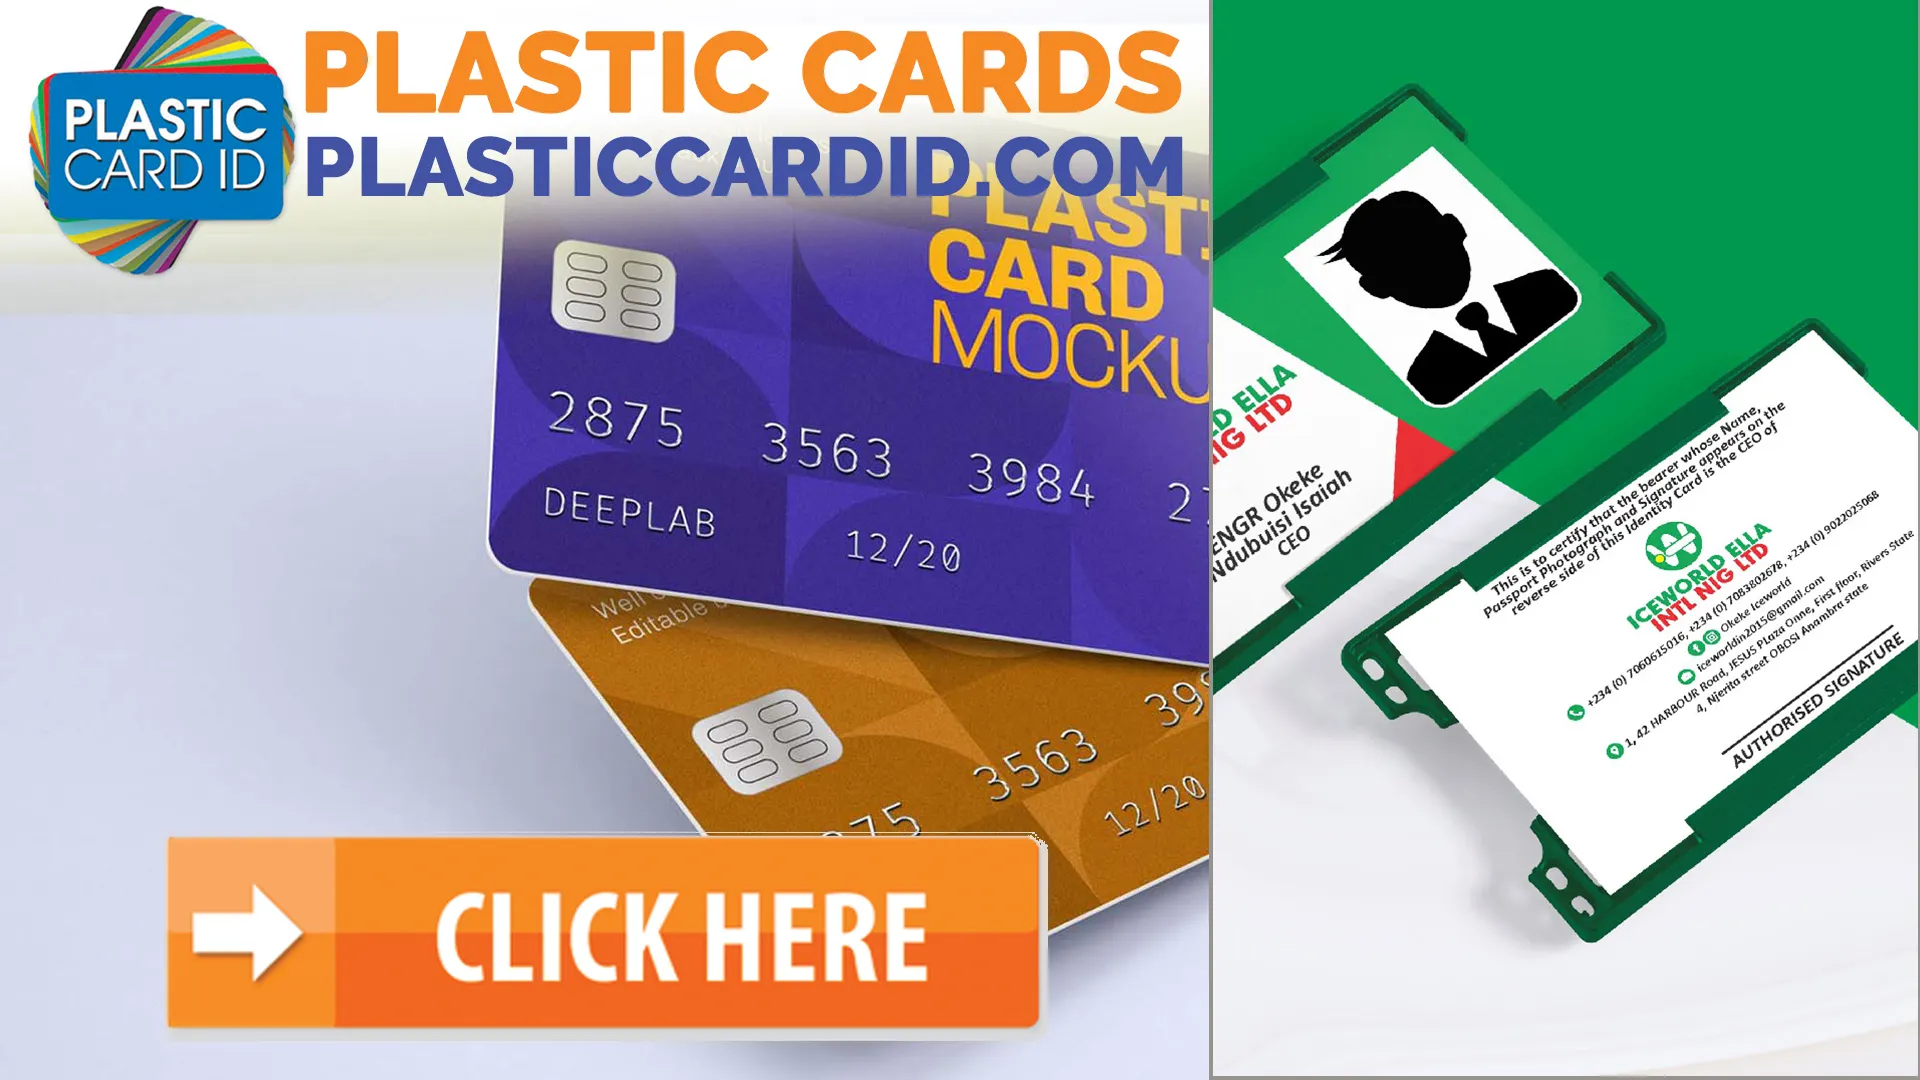 The Spectrum of Plastic Cards at Plastic Card ID




